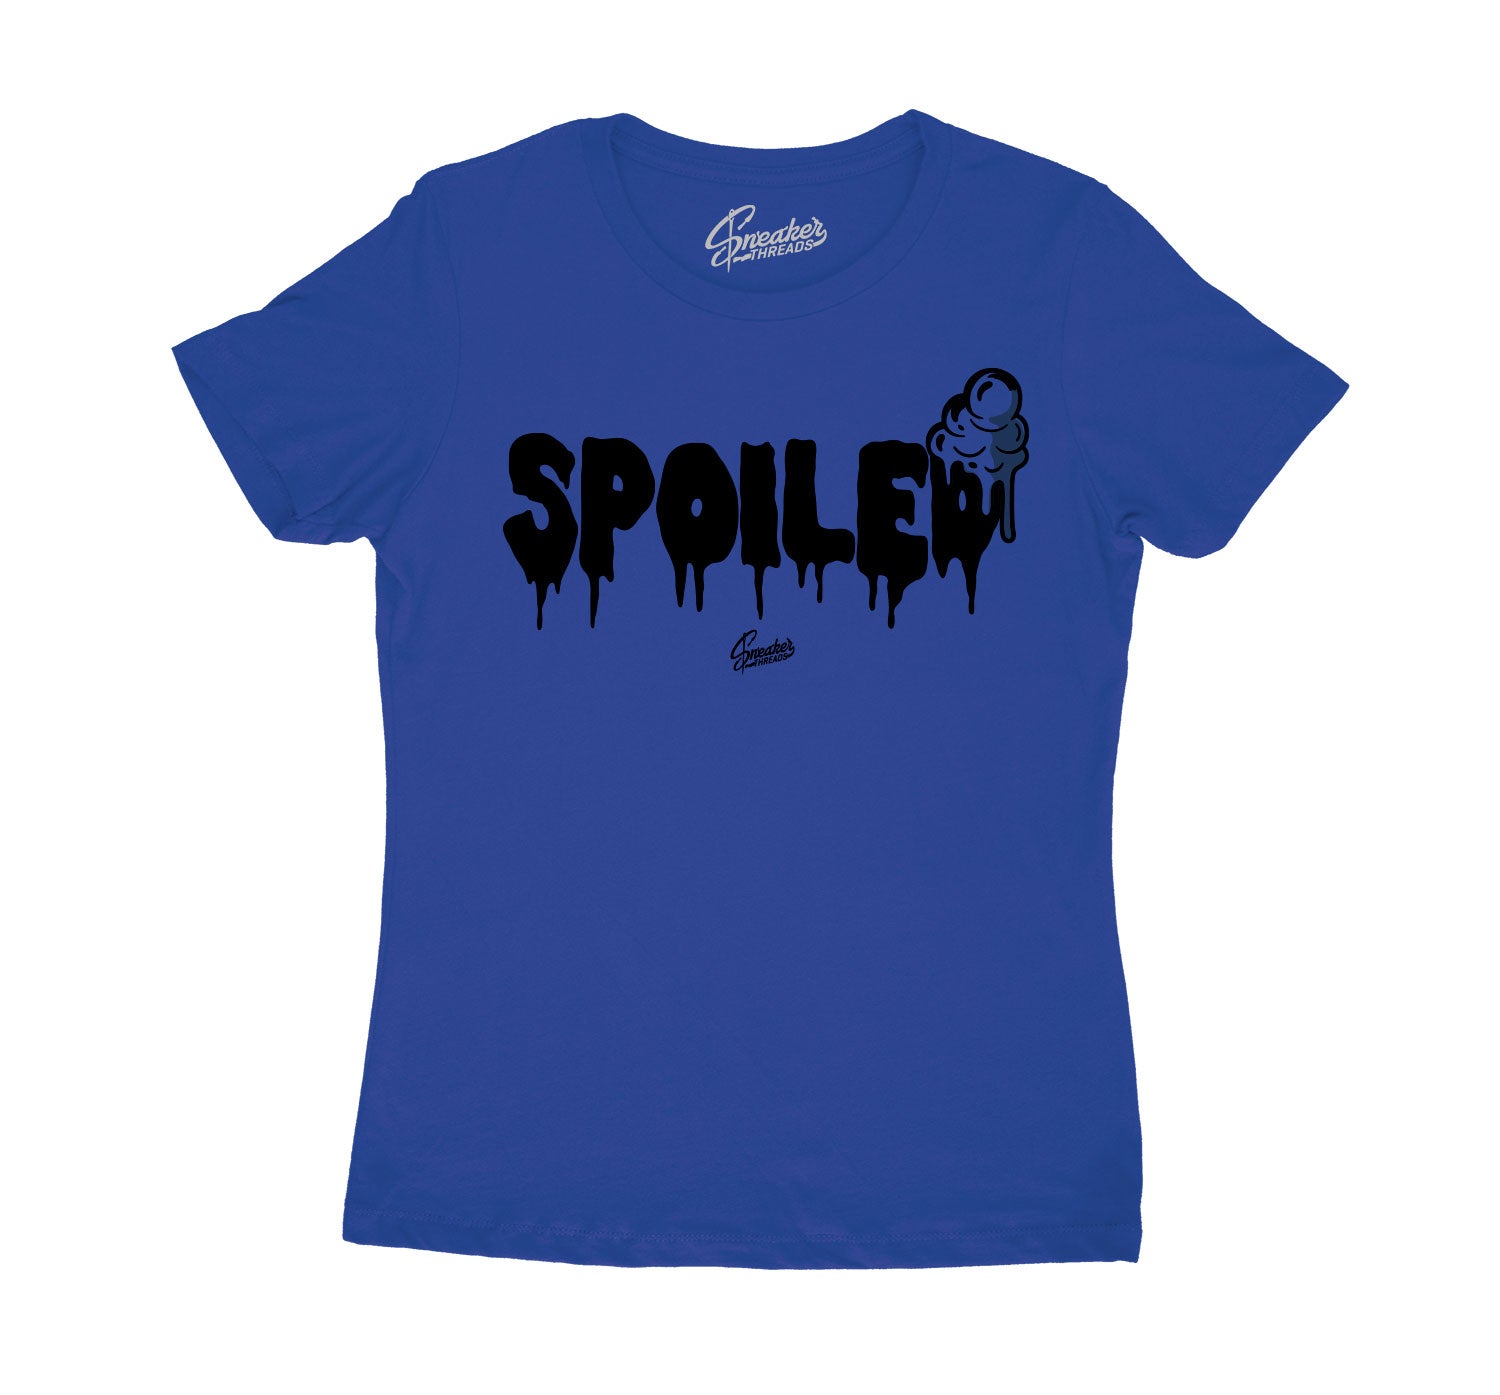 Black Hyper Royal Jordan 13 sneaker collection matches with womens t shirts